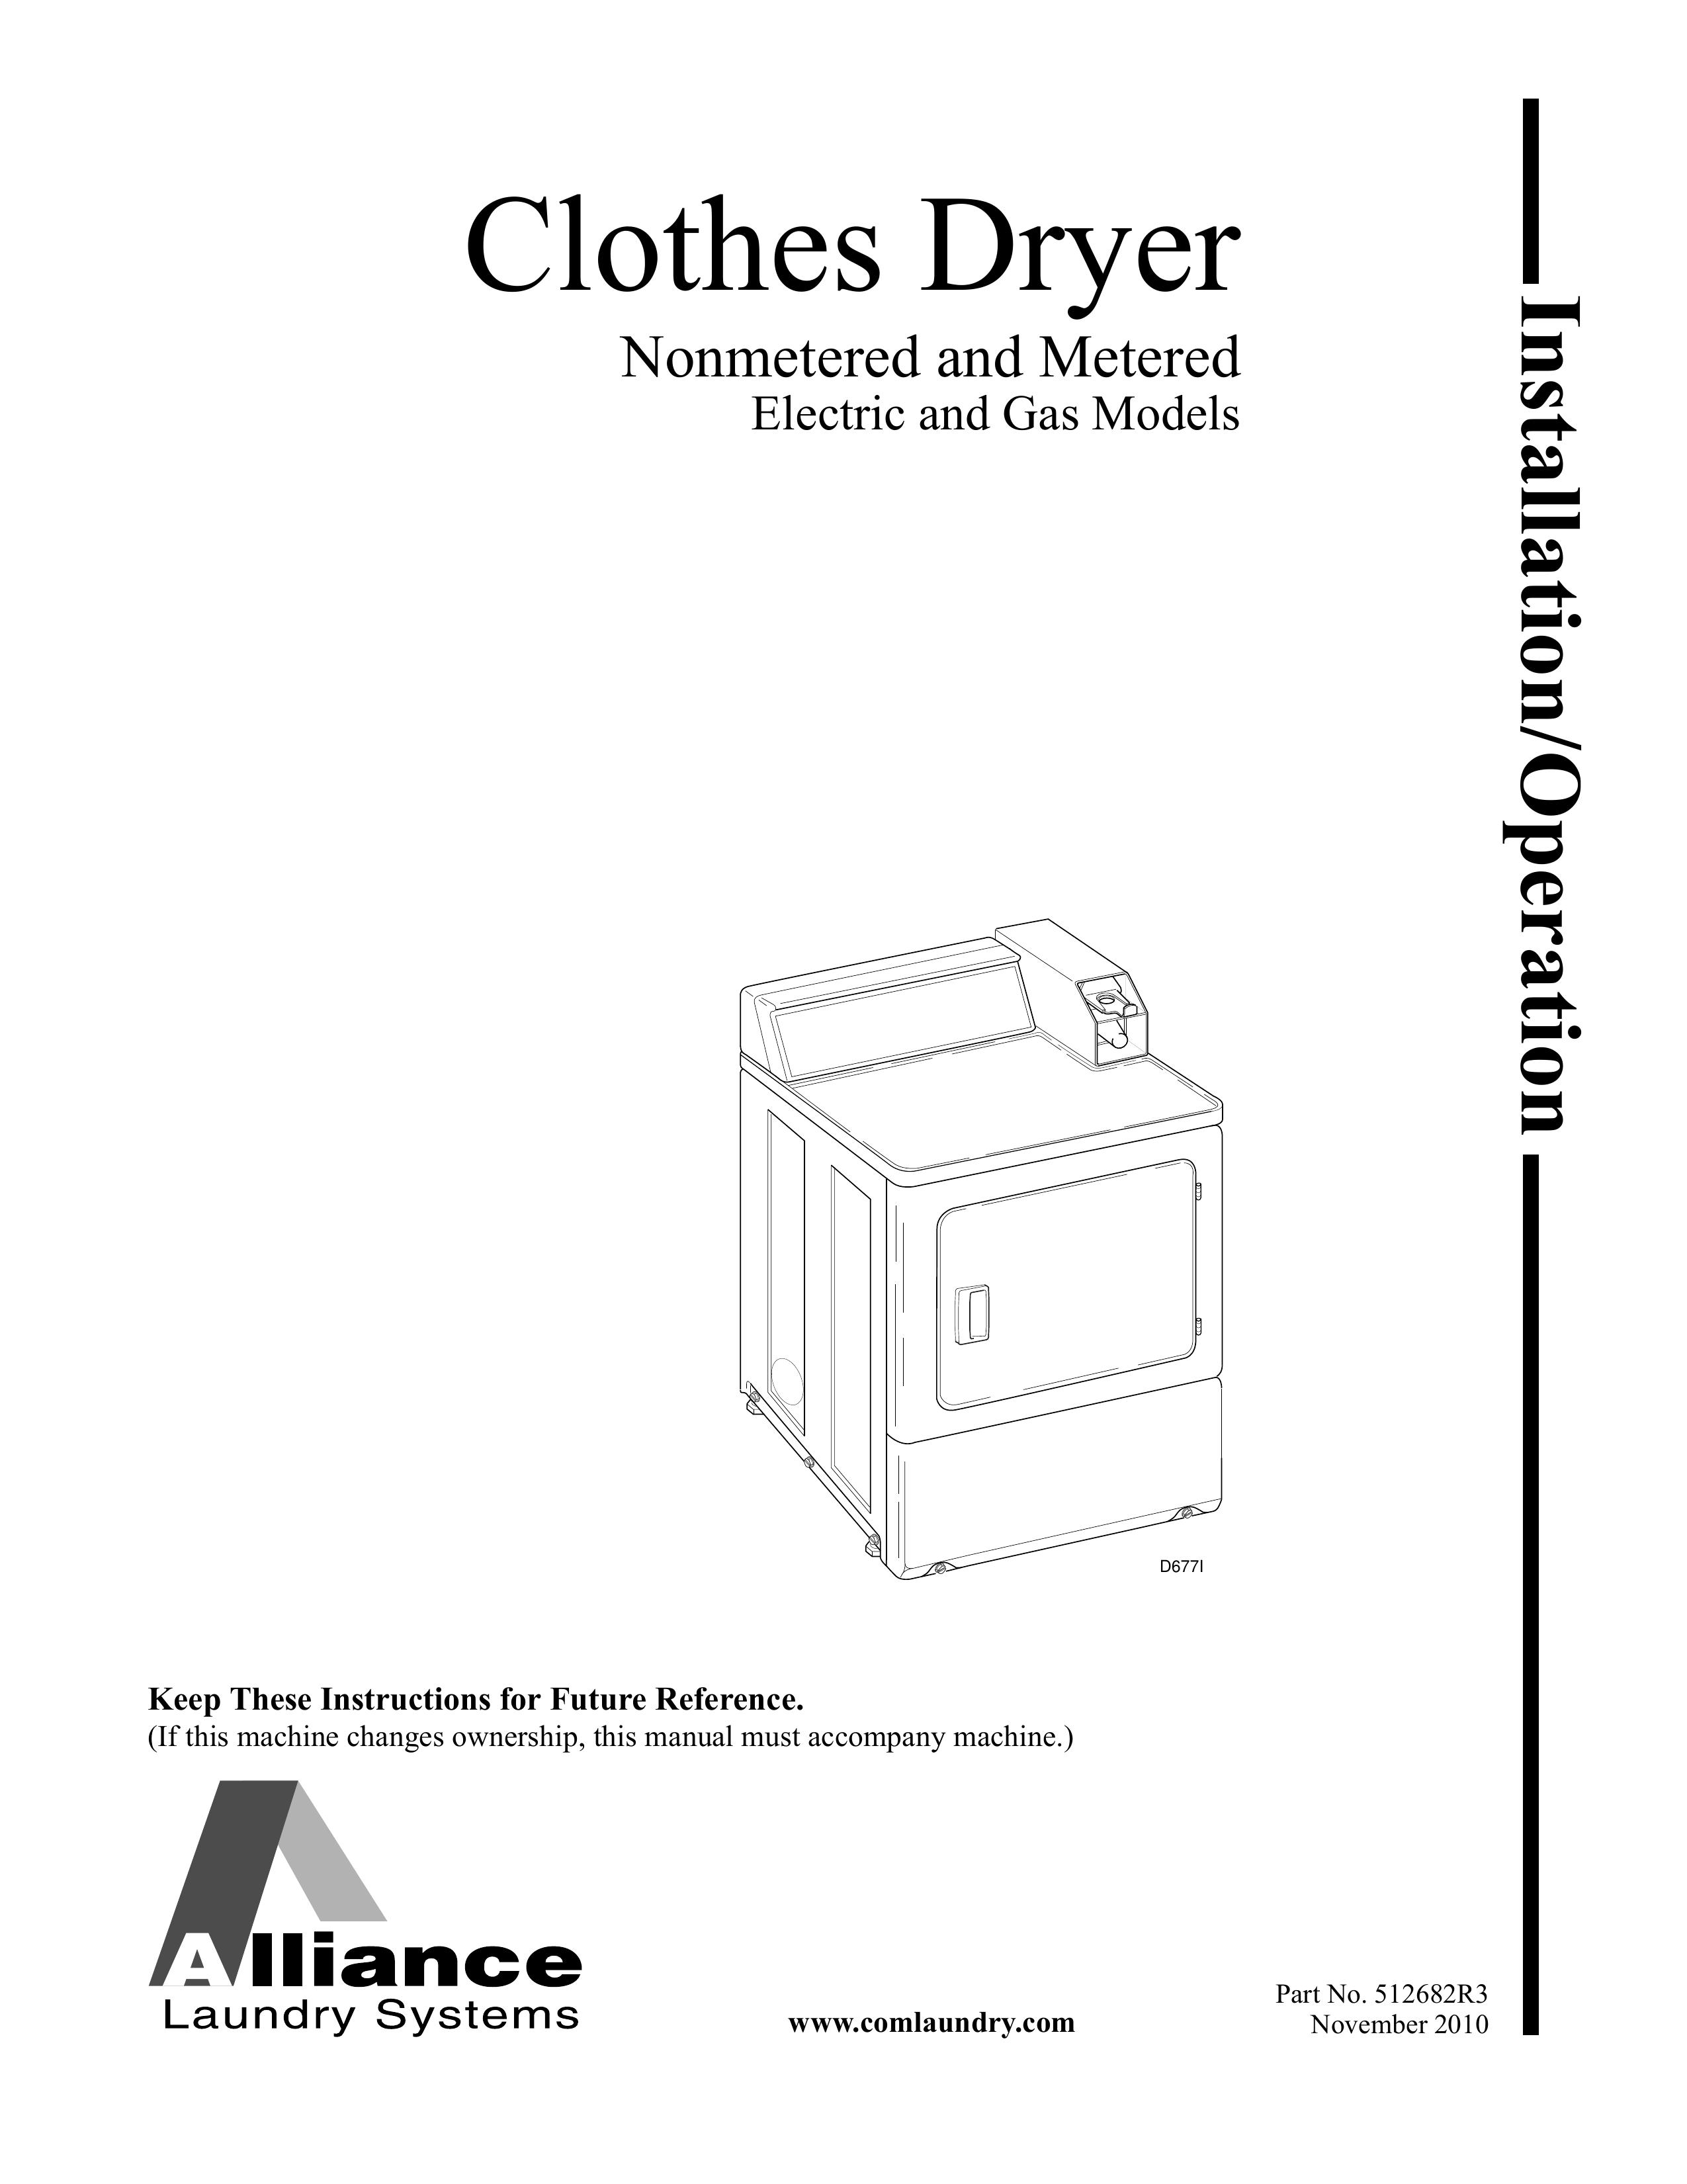 Alliance Laundry Systems D677I Clothes Dryer User Manual (Page 1)